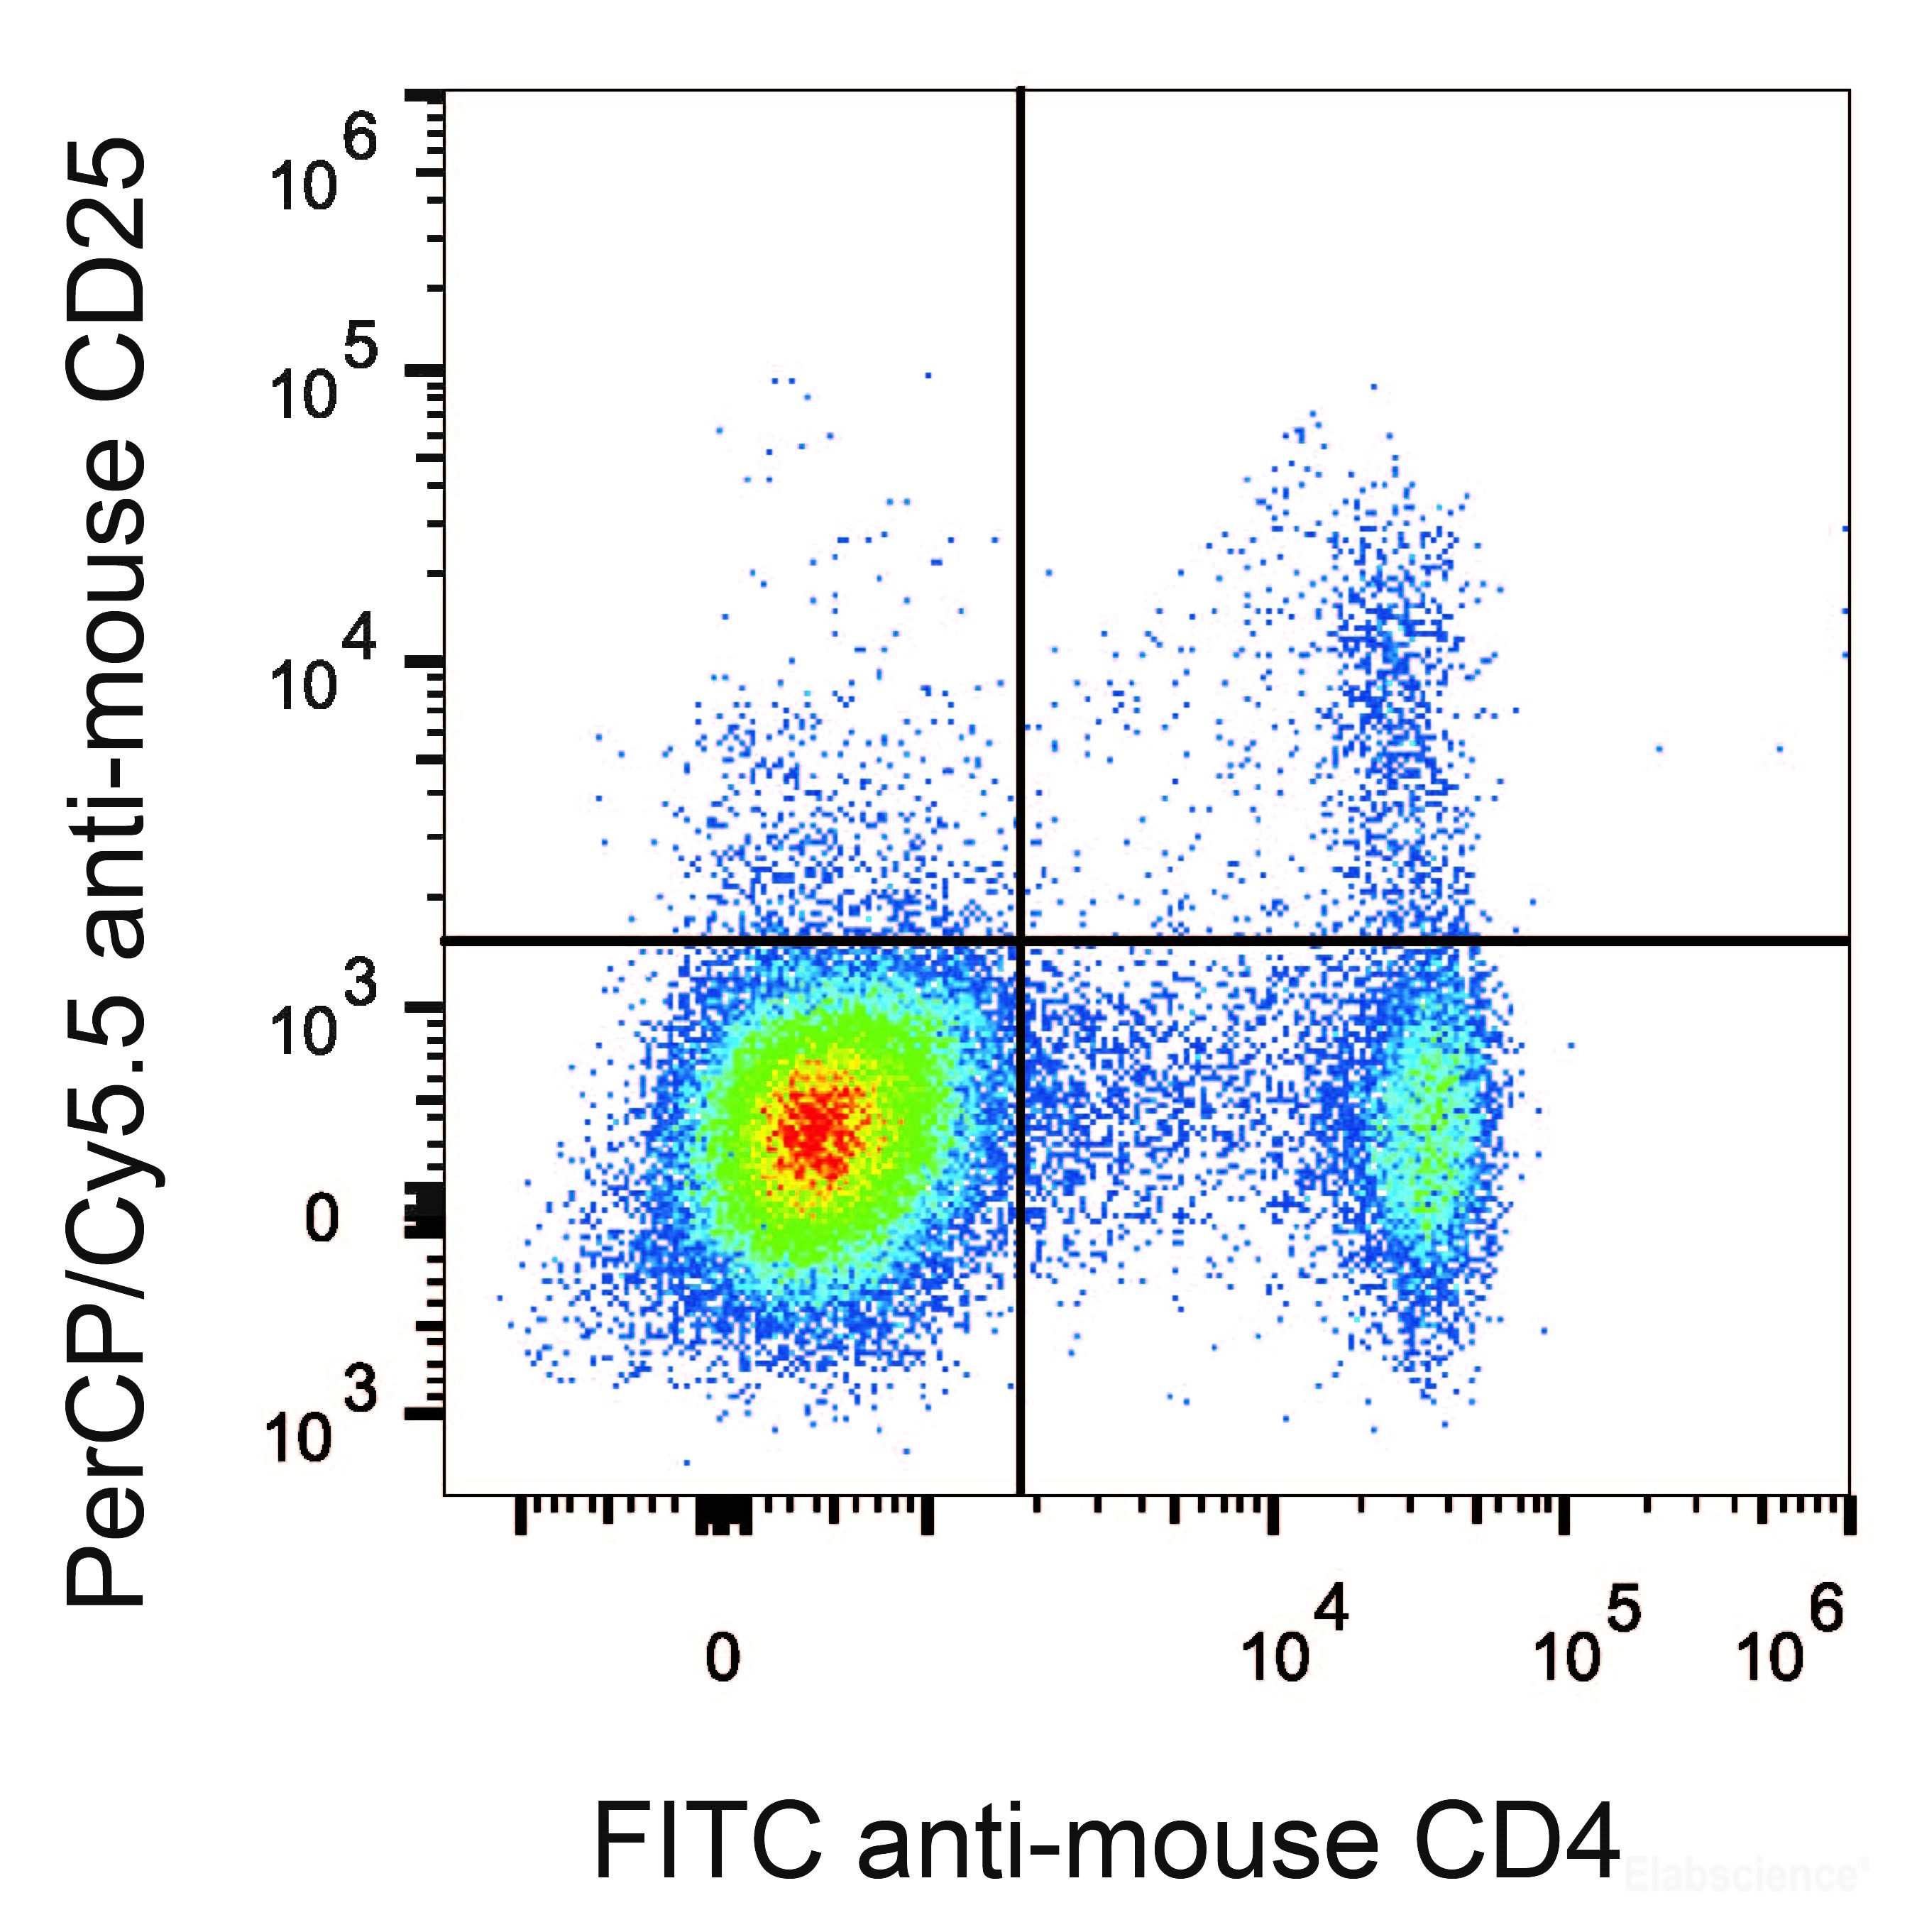 C57BL/6 murine splenocytes are stained with PerCP/Cyanine5.5 Anti-Mouse CD25 Antibody and FITC Anti-Mouse CD4 Antibody Antibody.